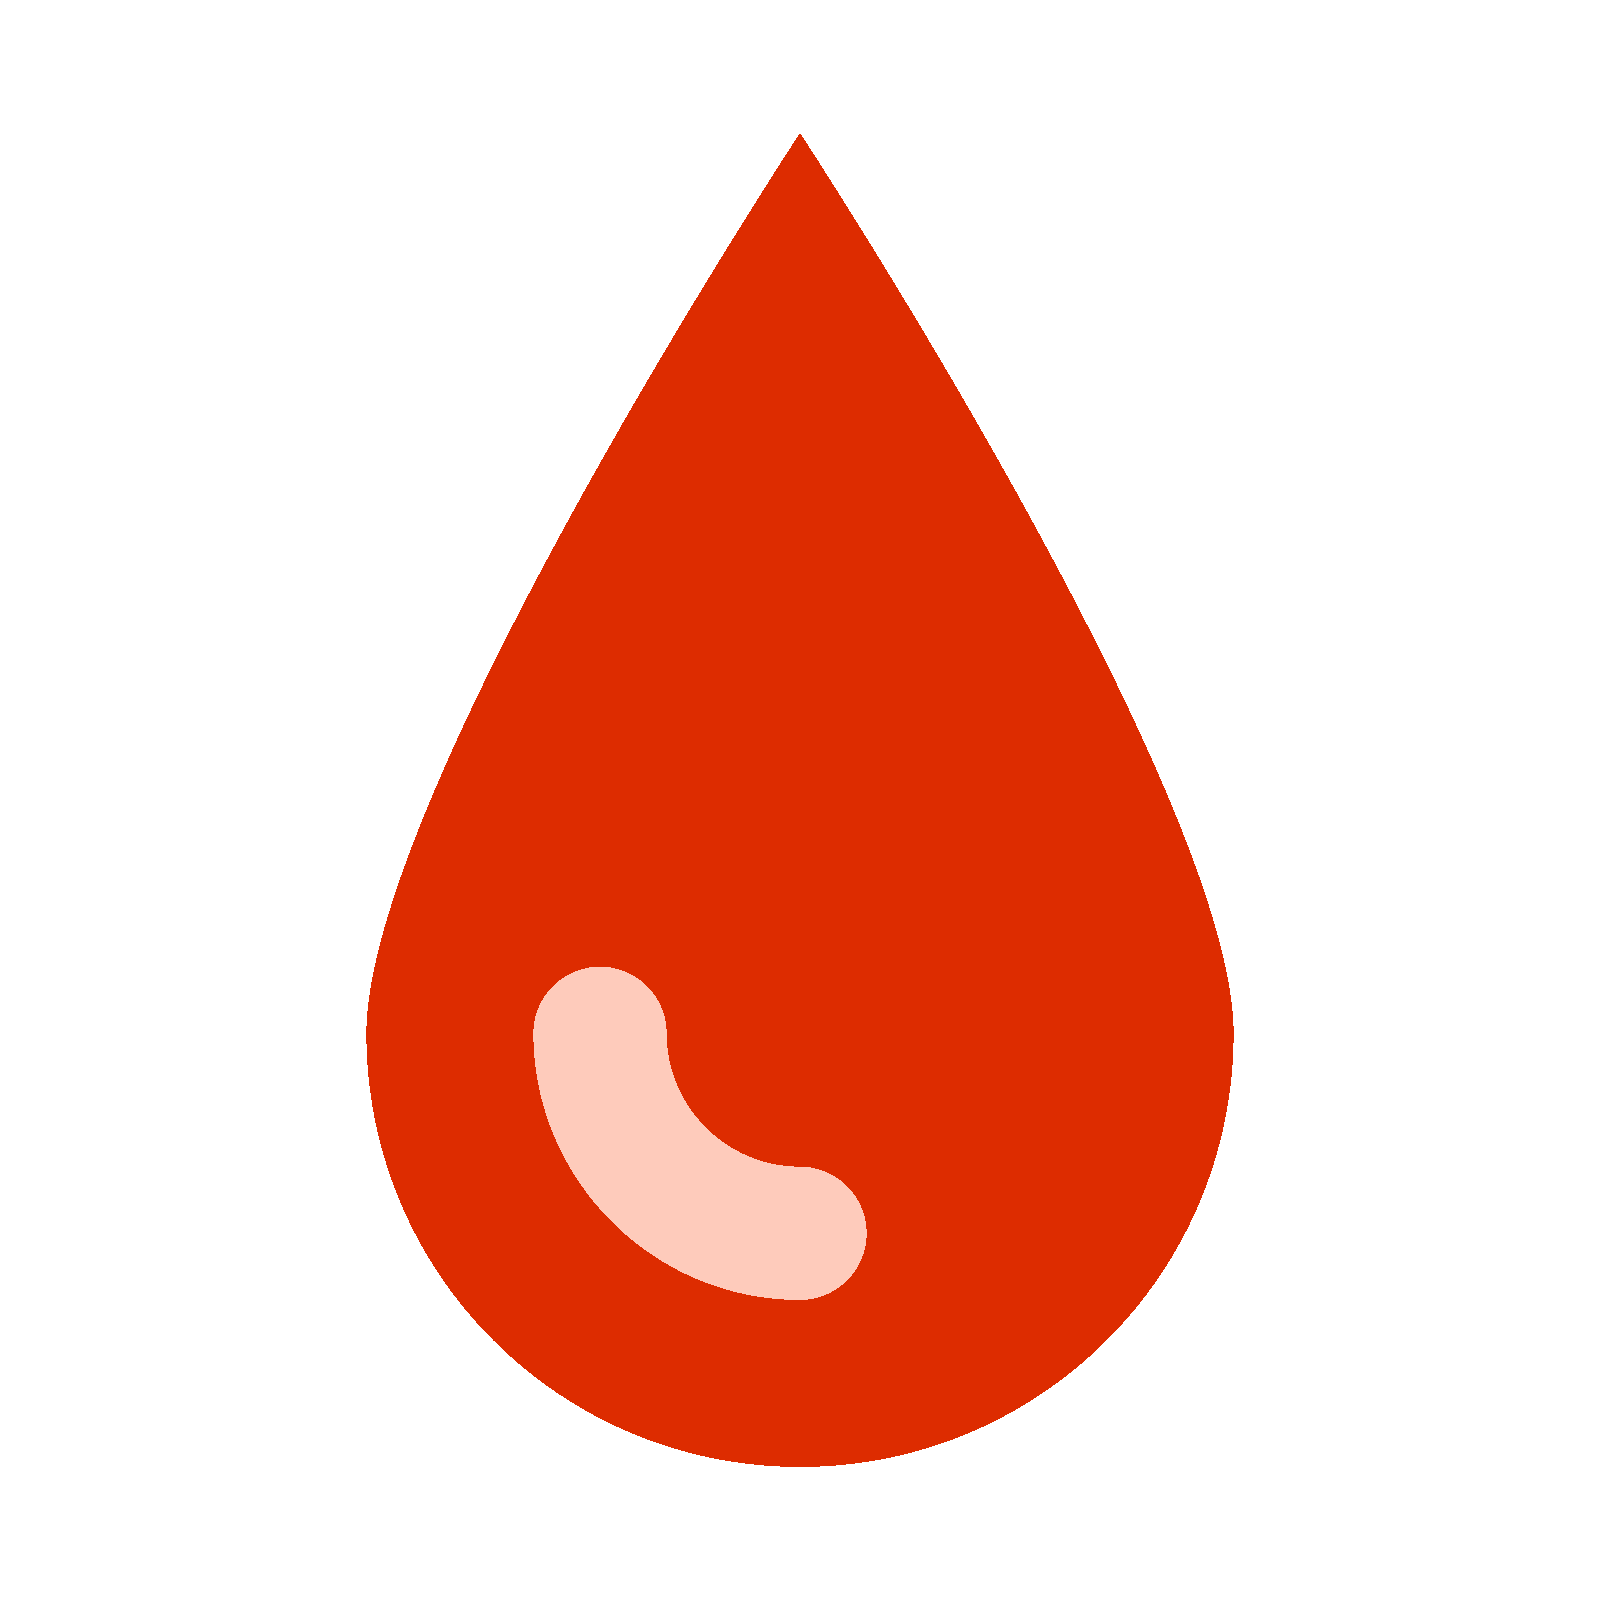 Blood drop png. Of icon free download